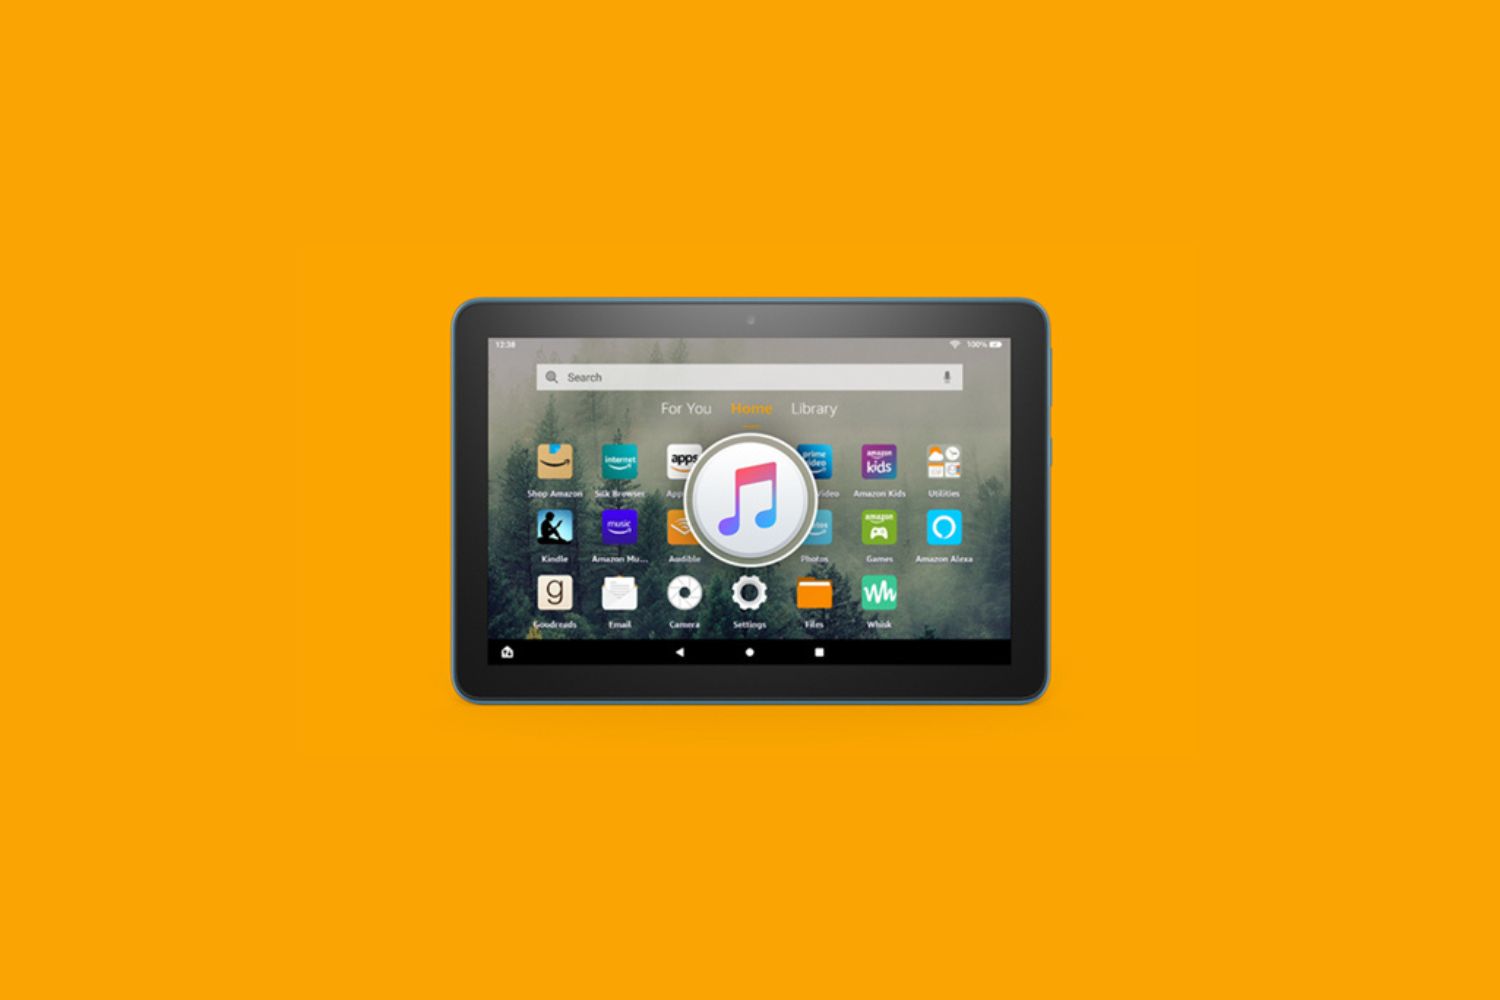 How To Add Music To Fire Tablet